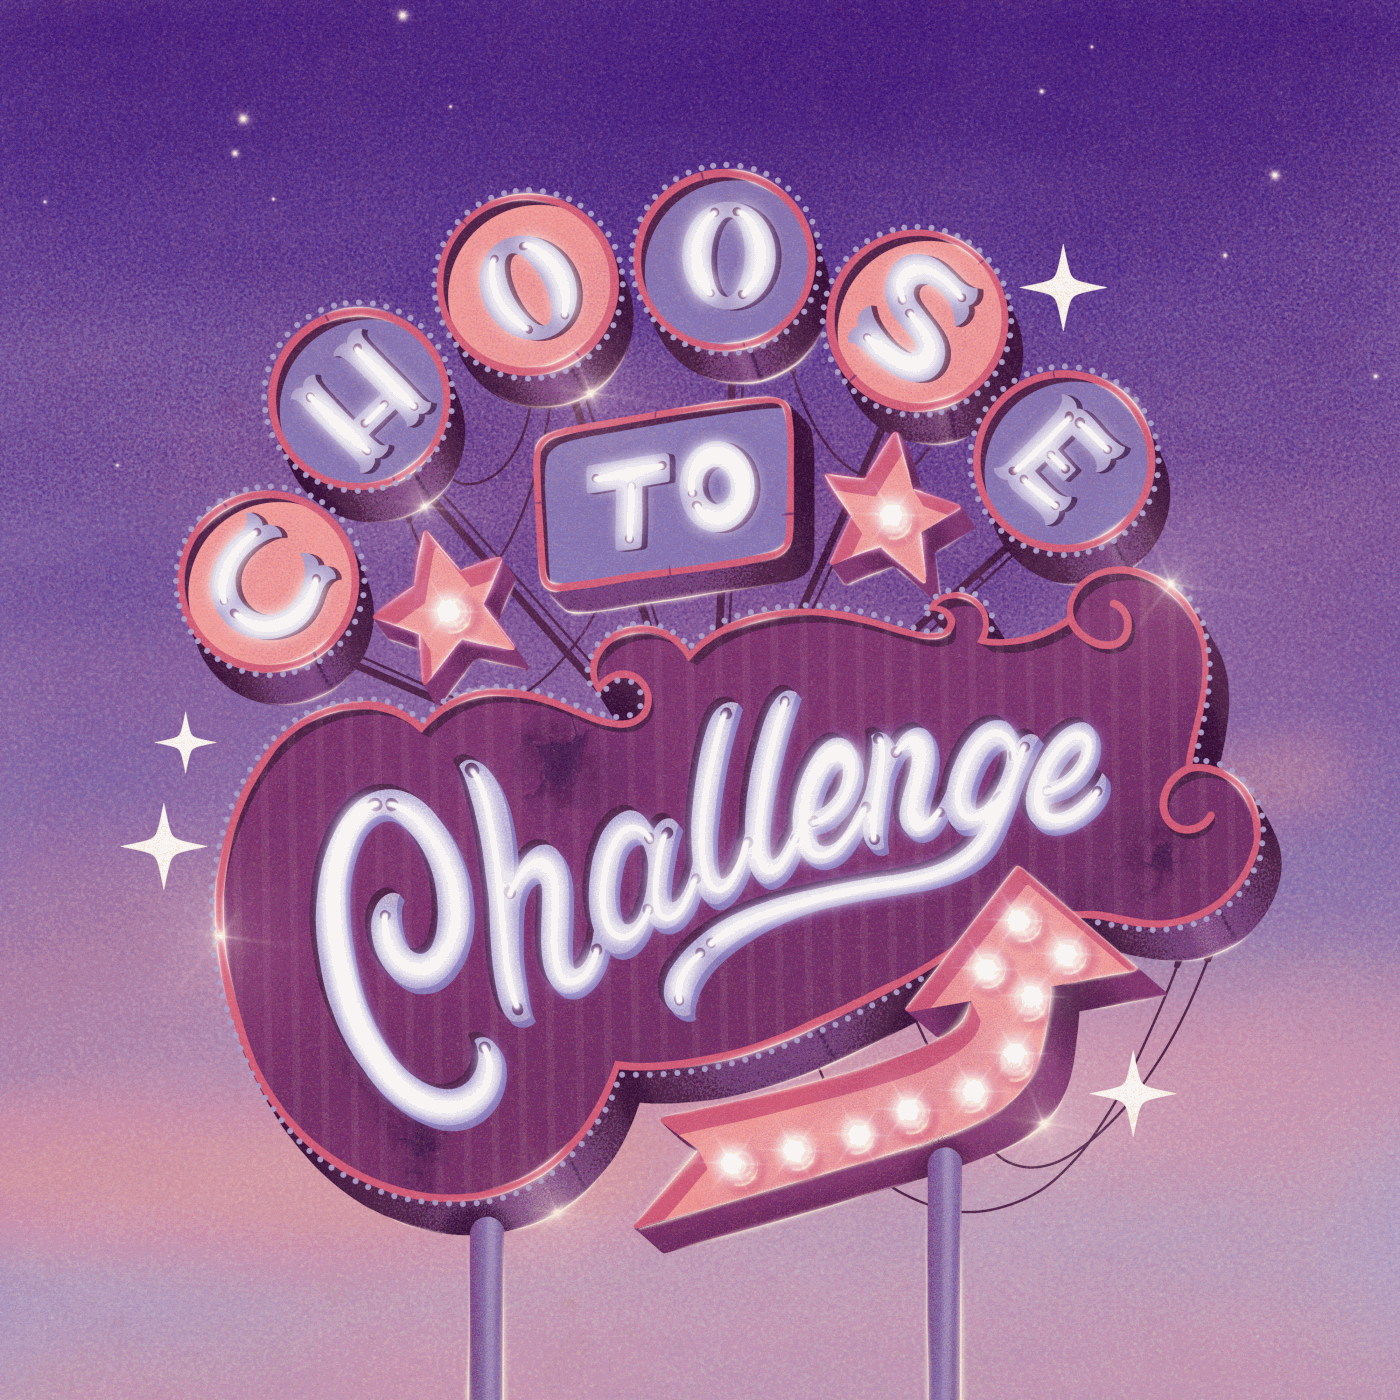 "Choose to challenge" Retro Sign lettering in Procreate